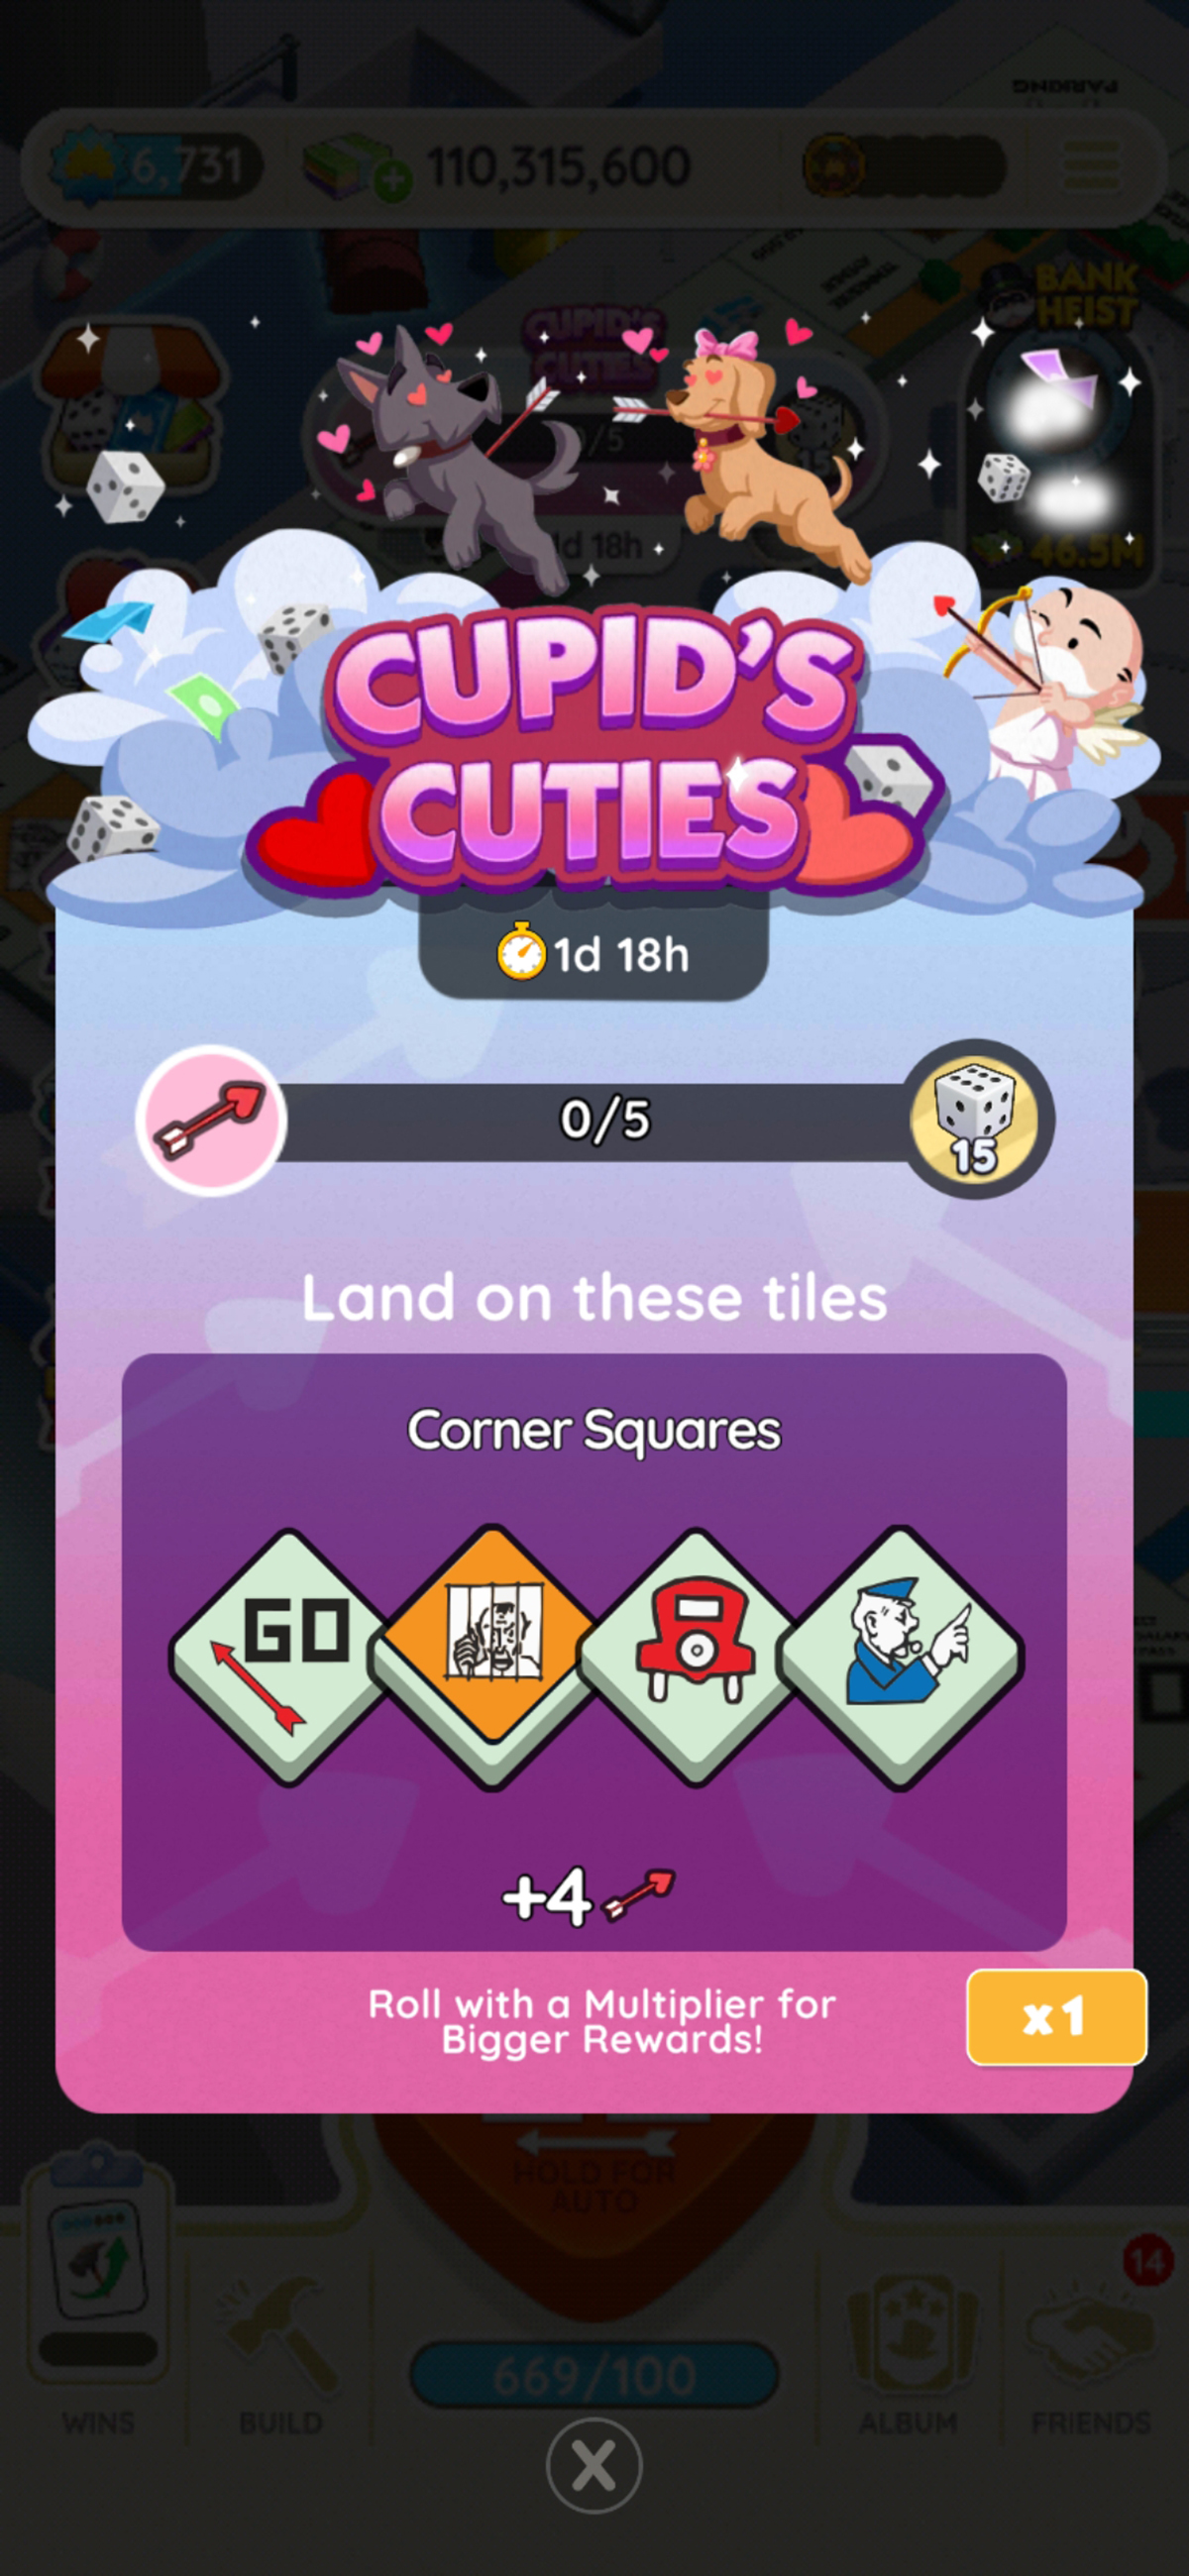 A full-sized image showing Mr. Monopoly aiming an arrow at two dogs. The image is part of an article on all the rewards and milestones that are part of the Monopoly GO Cupid's Cuties event.